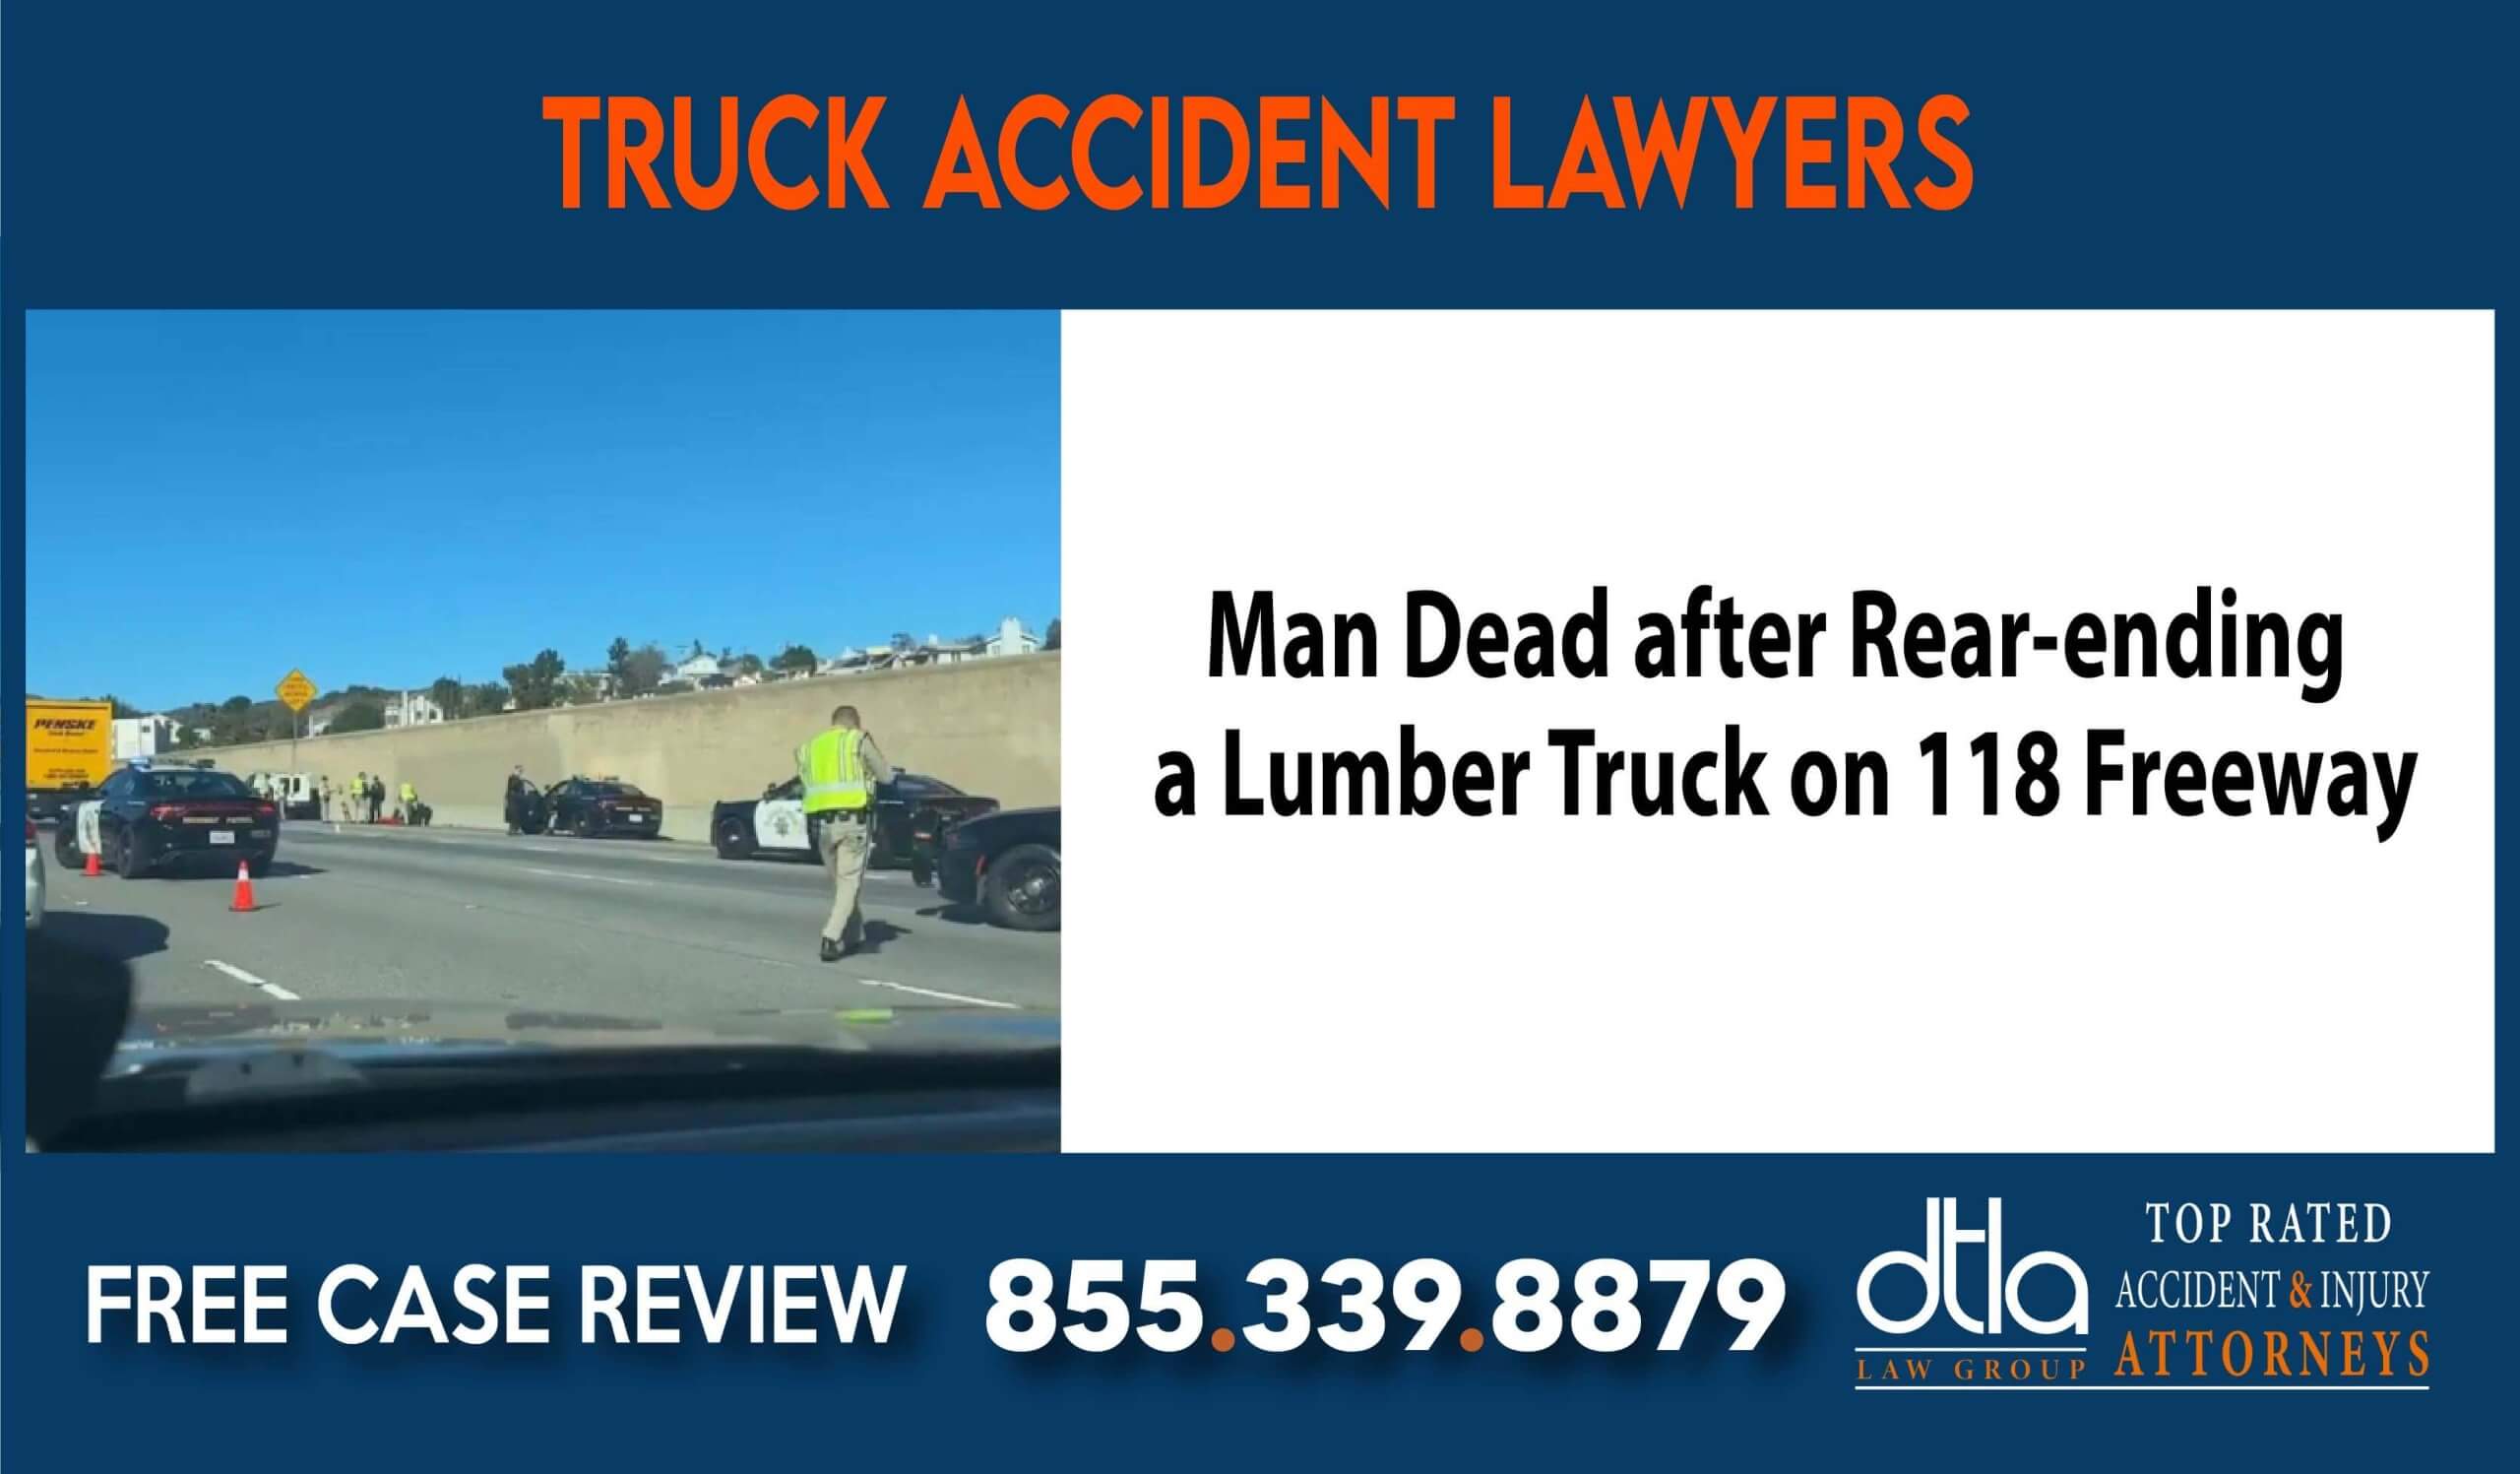 Man Dead after Rear-ending lumber truck incident liability sue laywer attorney compensation